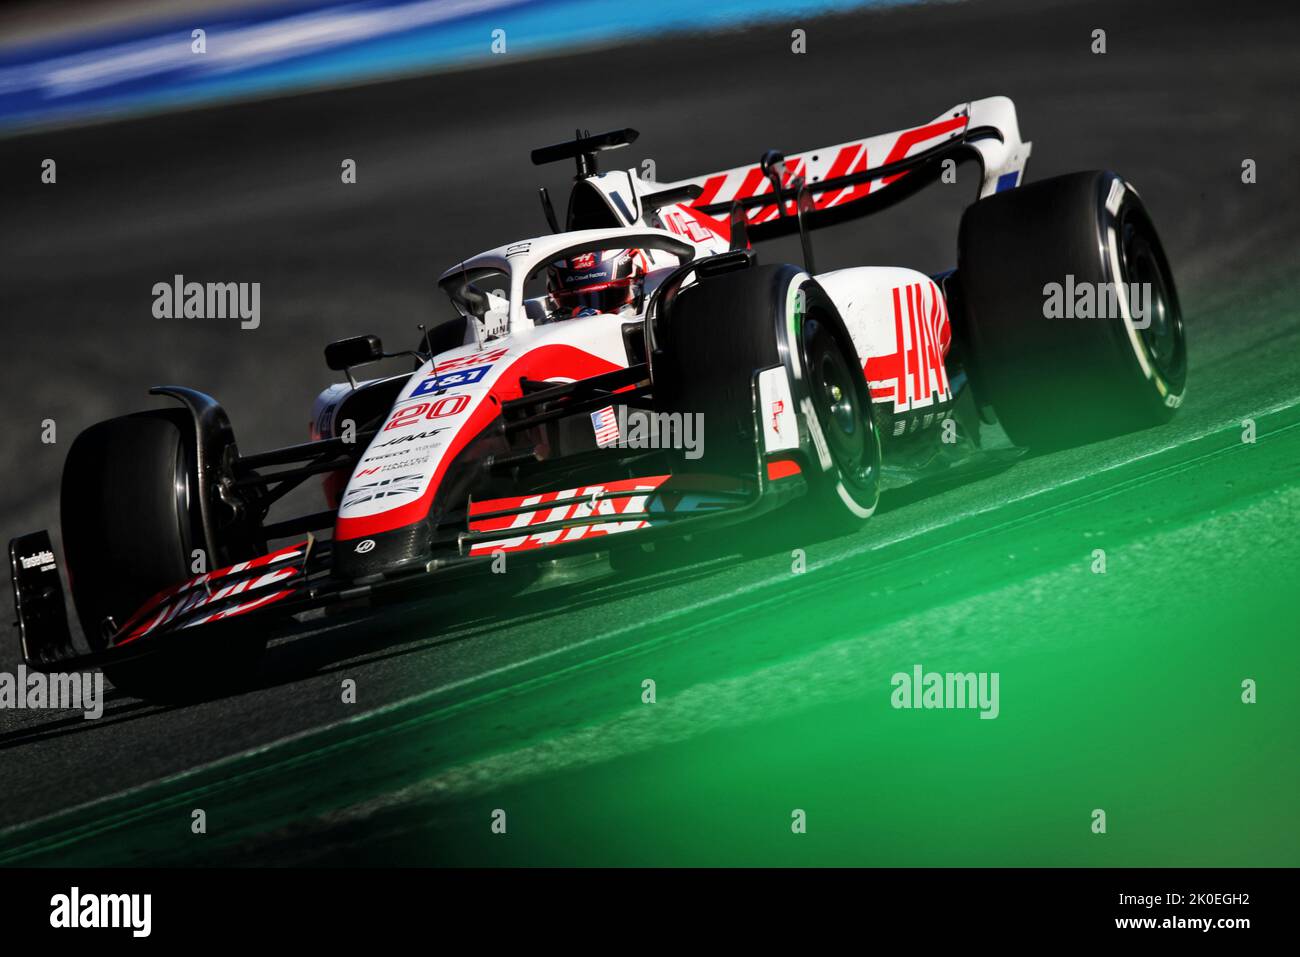 Monza, Italy. 11th Sep, 2022. Kevin Magnussen (DEN) Haas VF-22. Italian Grand Prix, Sunday 11th September 2022. Monza Italy. Credit: James Moy/Alamy Live News Stock Photo